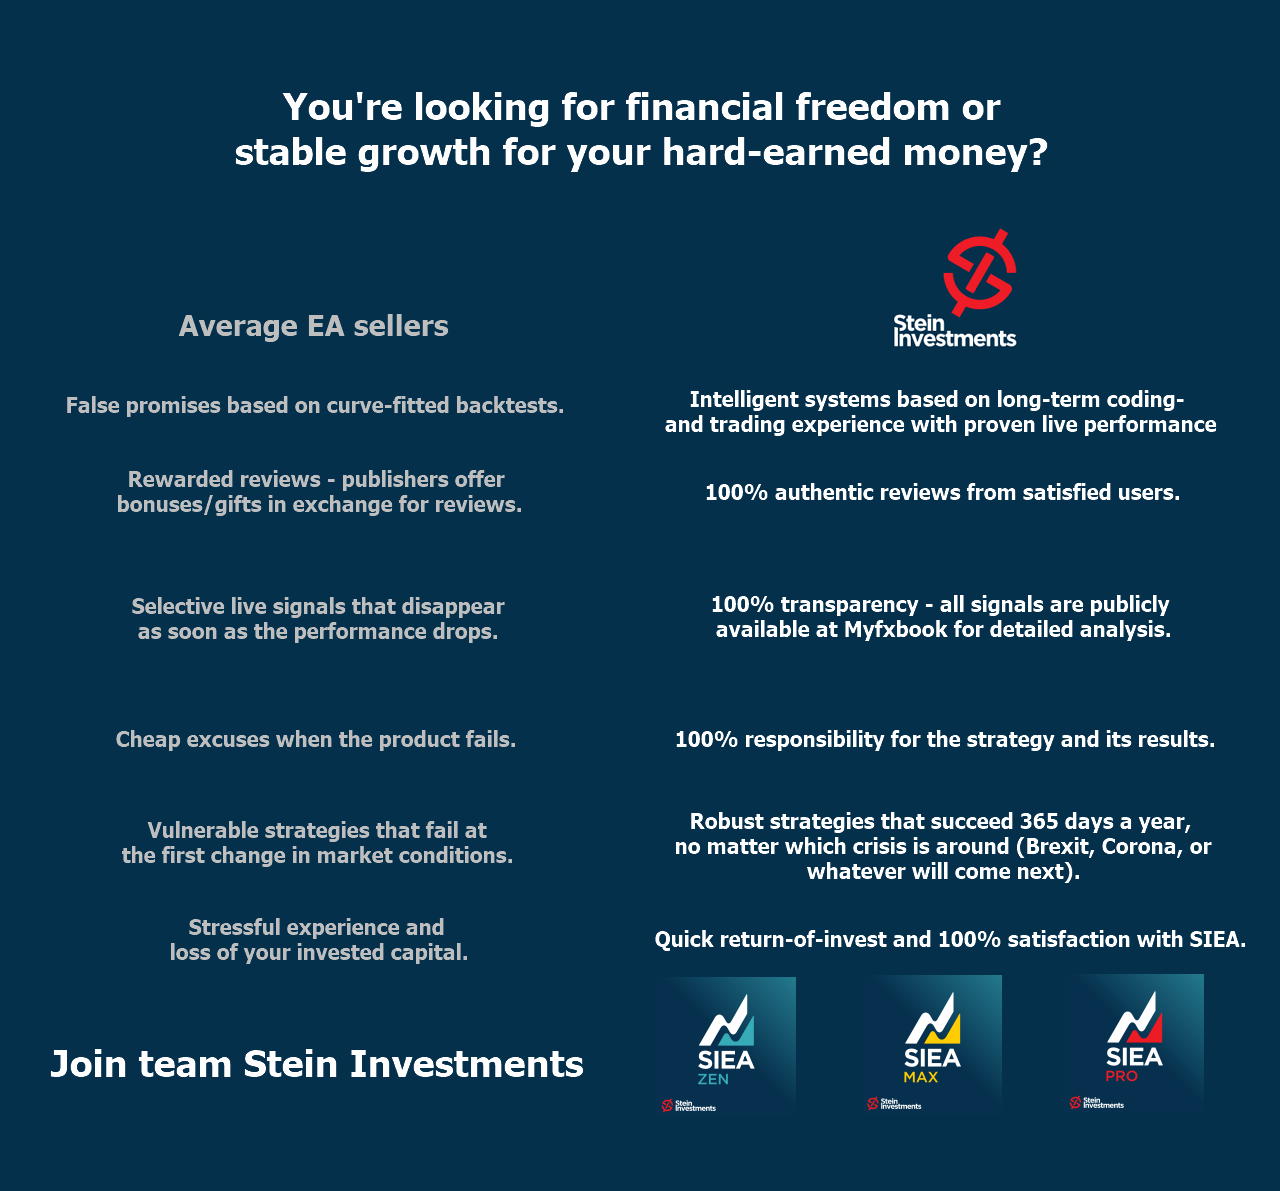 We’ve seen so many EAs struggles or kill their user’s accounts.

SIEA is different and provides a long-lasting positive experience for its users due to its outstanding risk-reward ratio.

Join team Stein Investments and benefit from our professional SIEA trading systems.

Get more information about it at https://www.mql5.com/en/blogs/post/745358 

All the best
Daniel & Alain